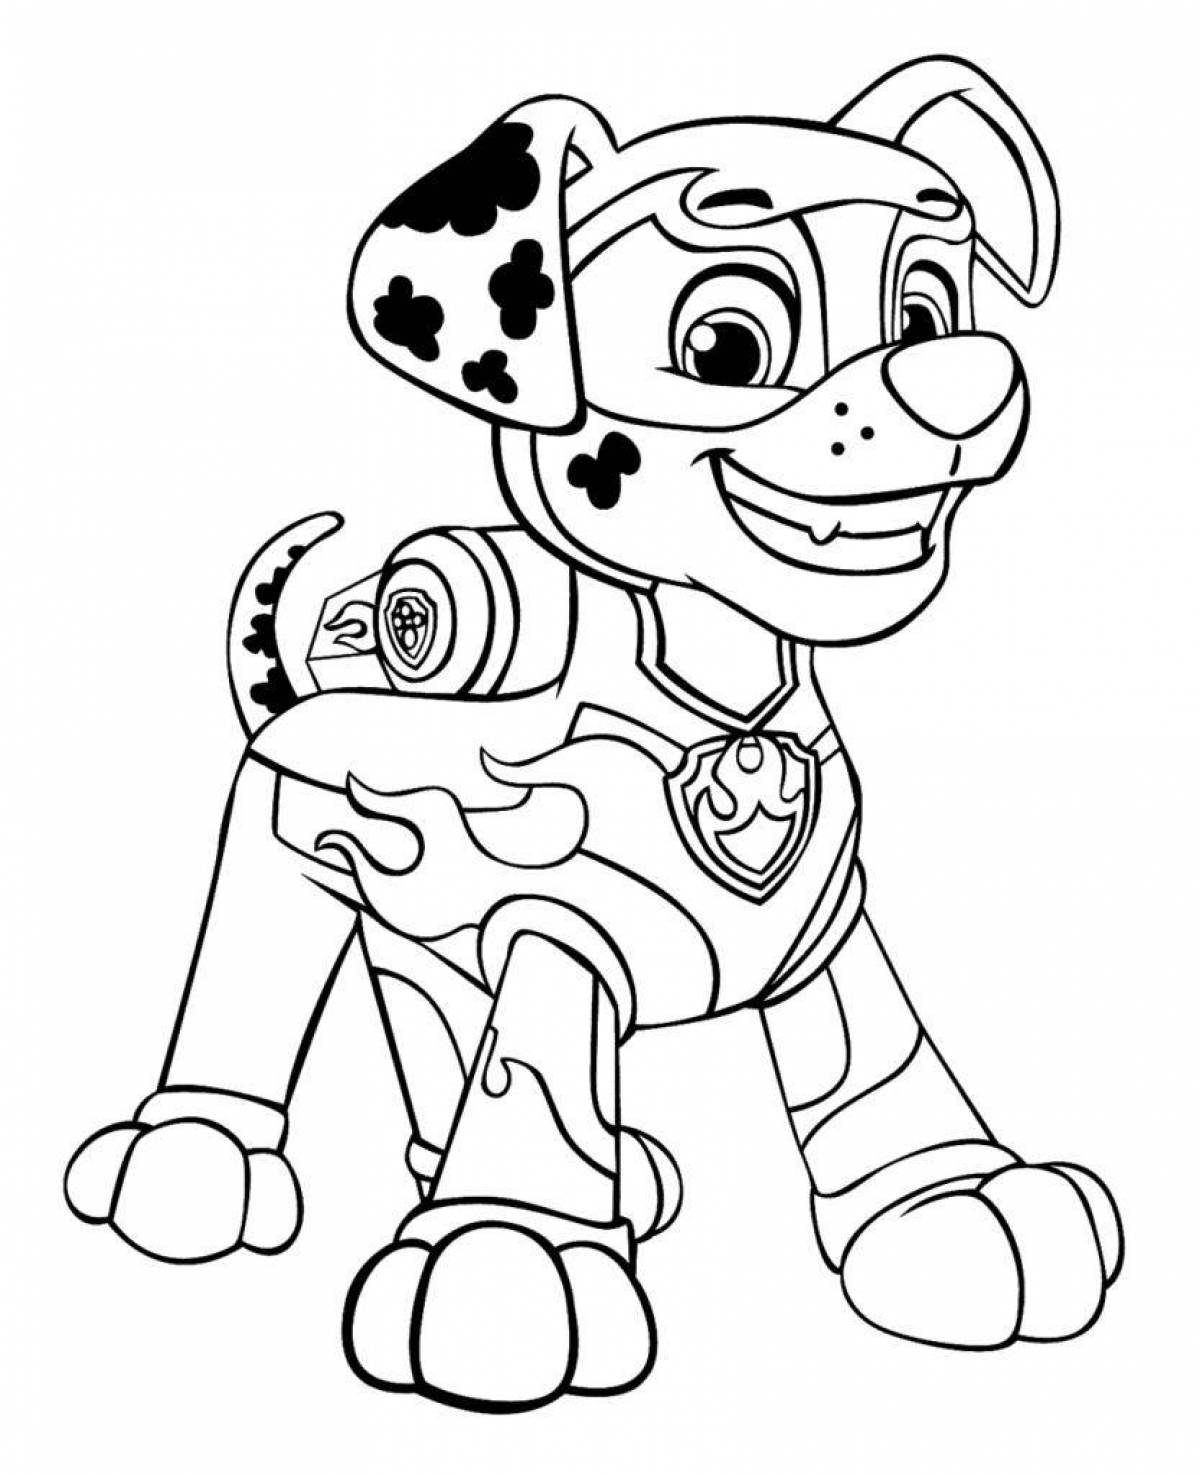 Coloring page paw patrol baby